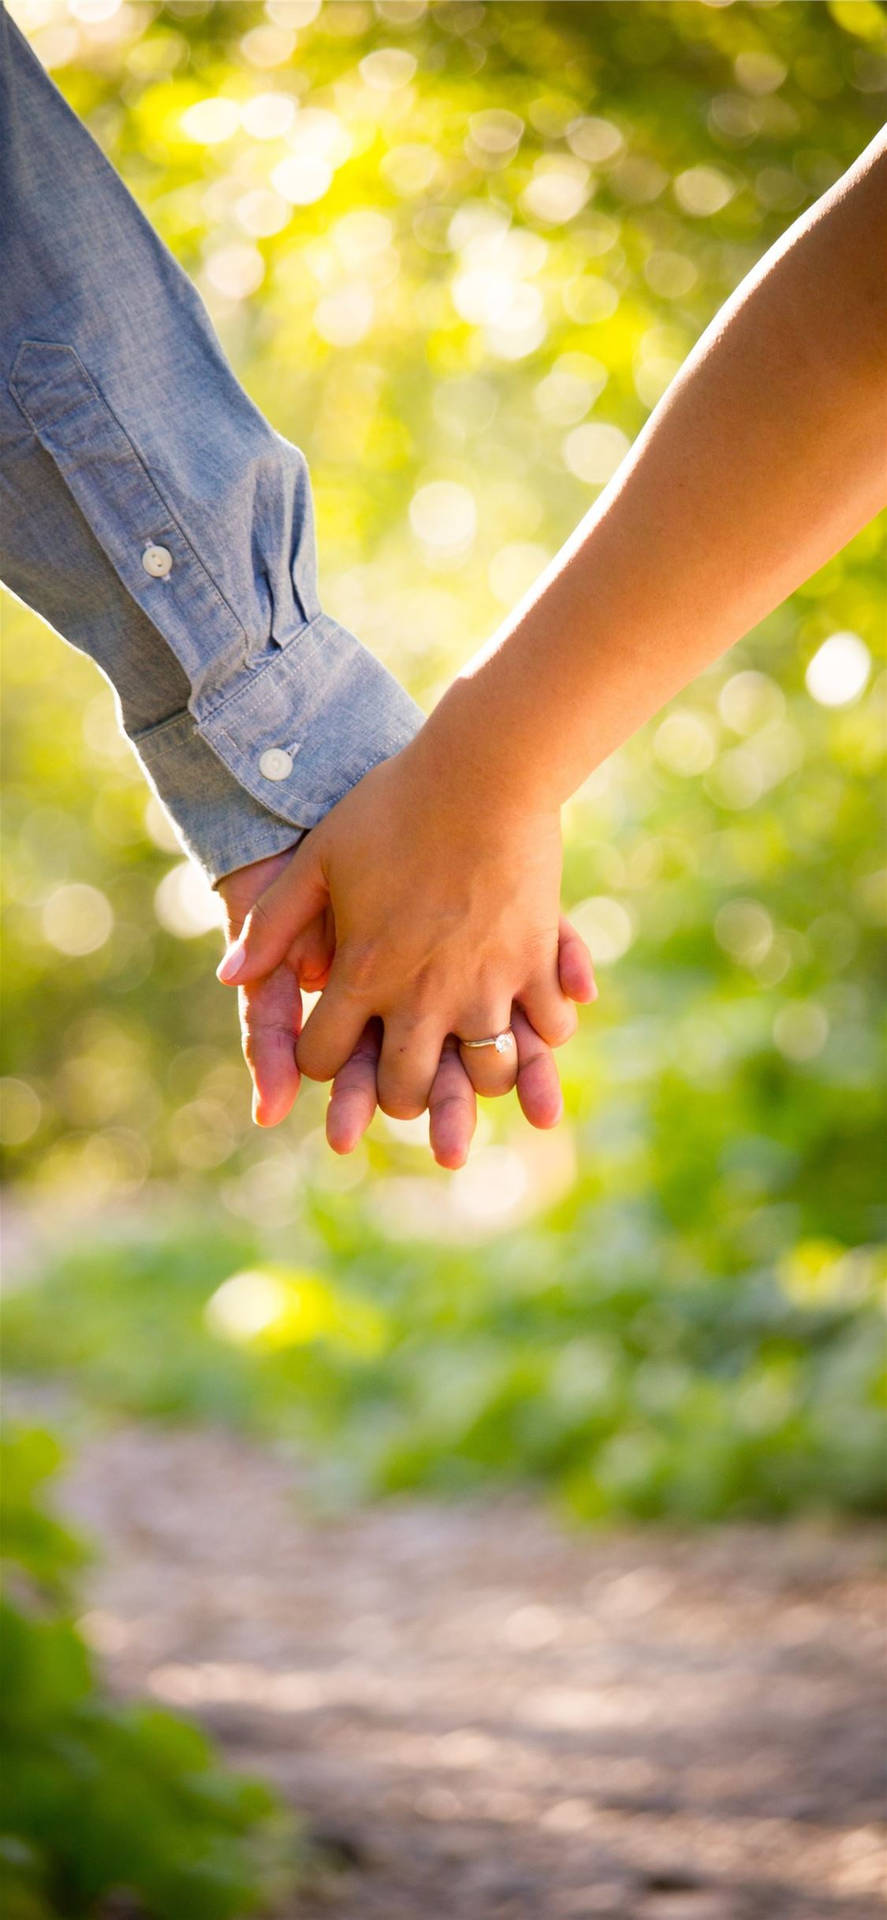 Holding Hands In Green Grass And Leaves Background